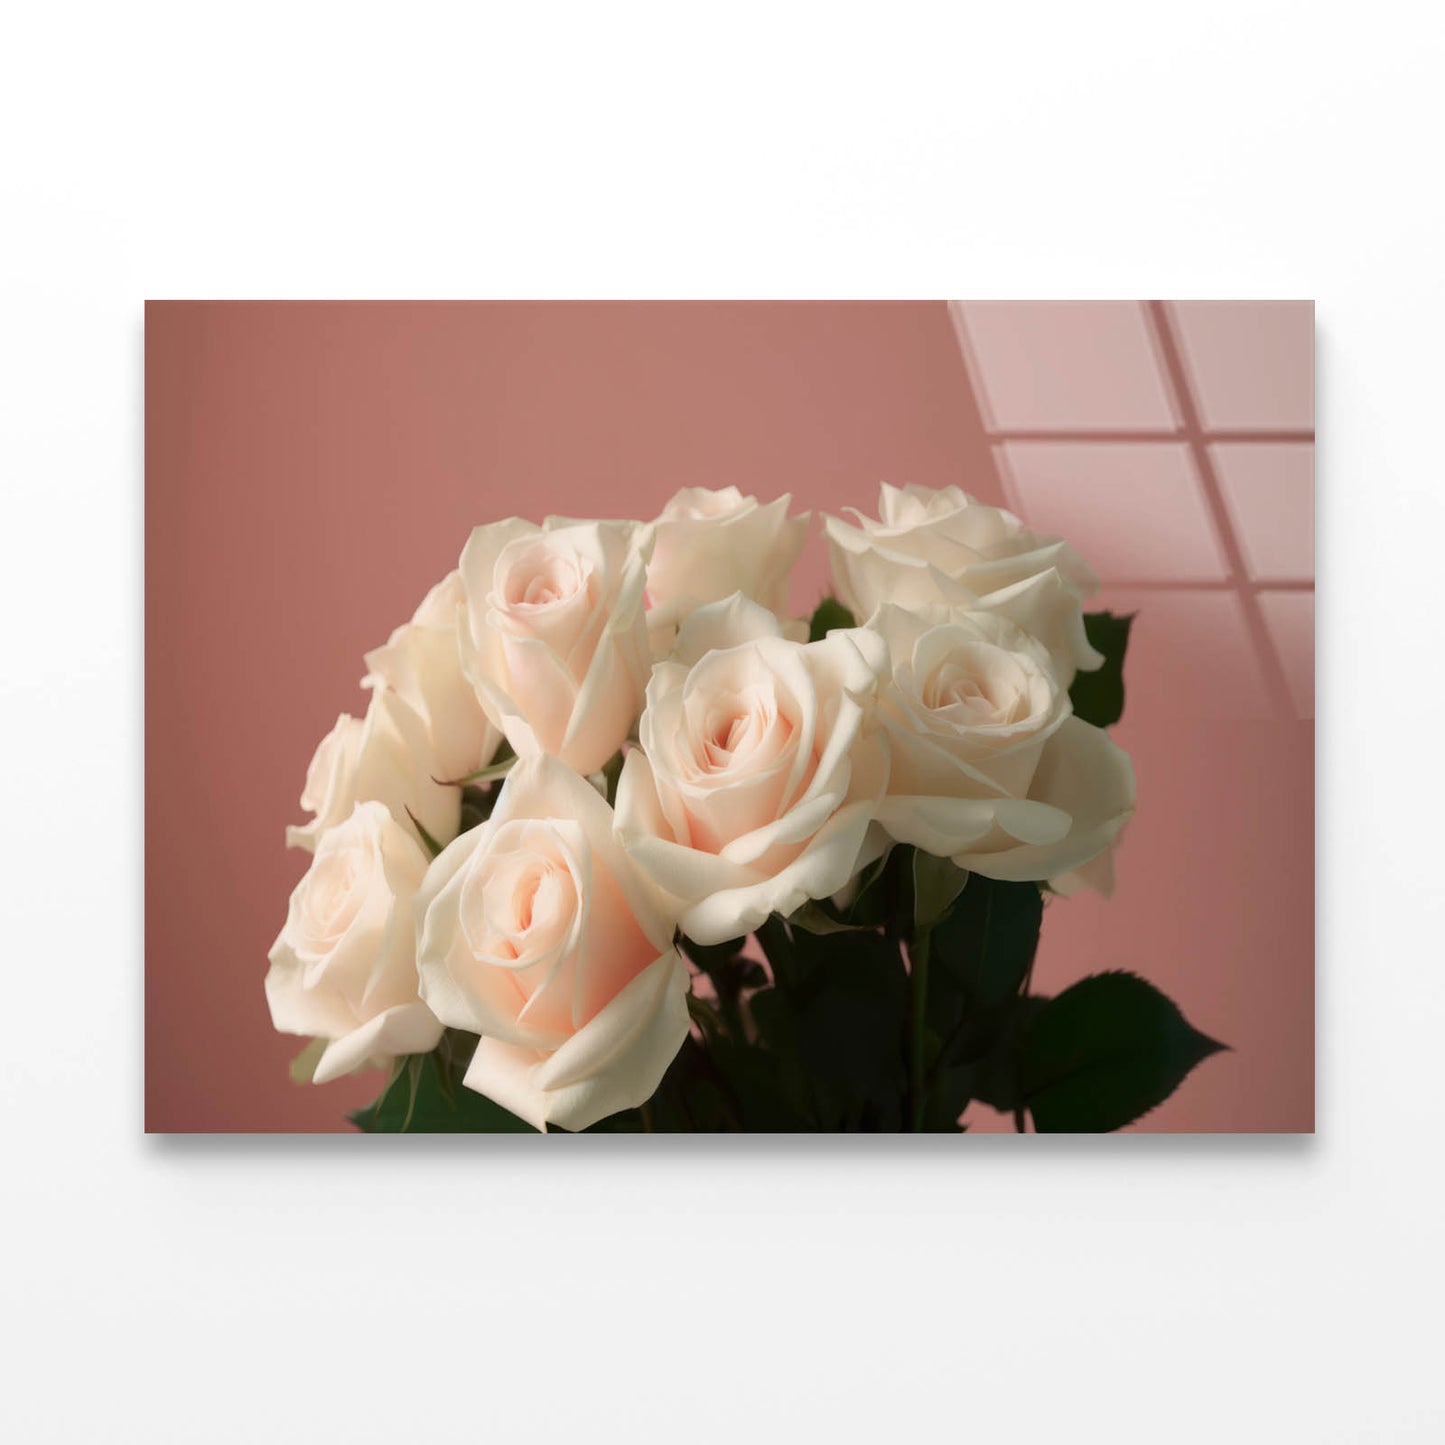 Bouquet of White Roses Acrylic Glass Print Tempered Glass Wall Art 100% Made in Australia Ready to Hang